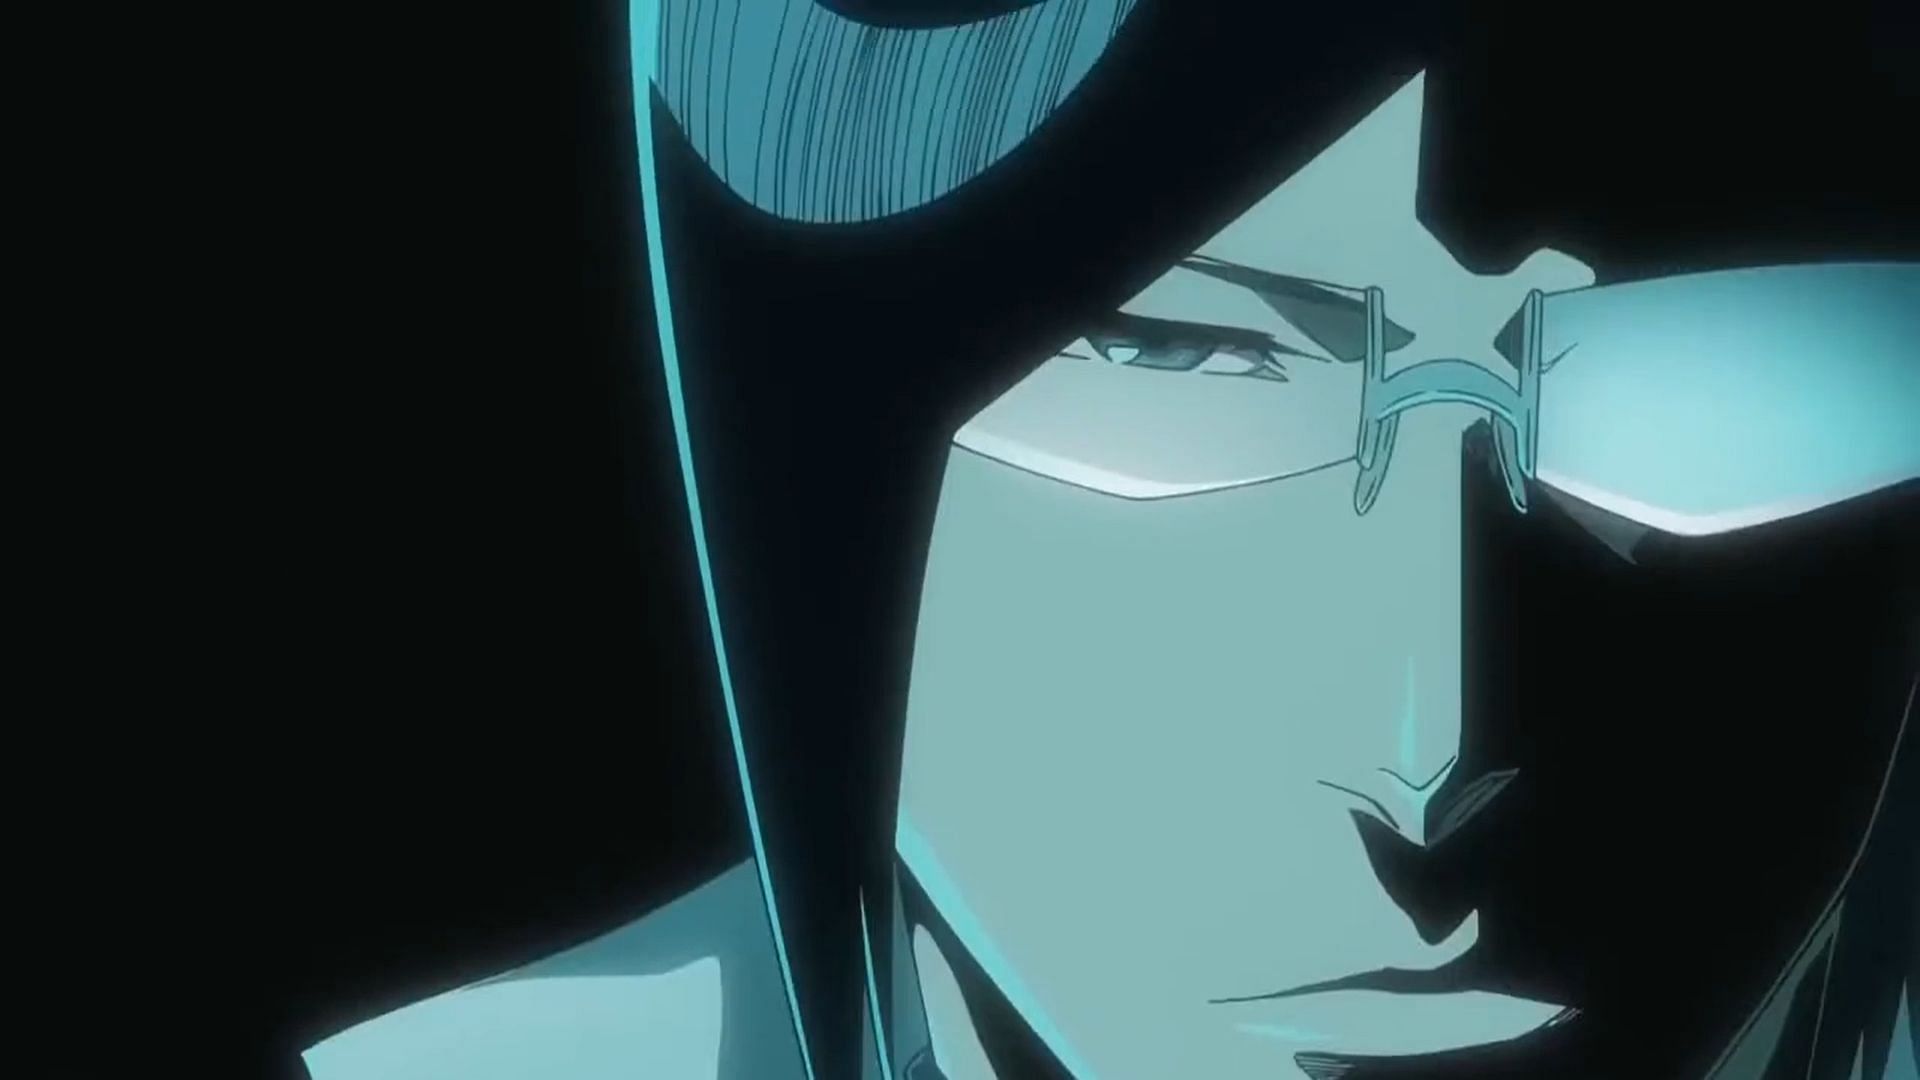 Bleach: Thousand-Year Blood War - Part 2 Episodes Guide - Release Dates,  Times & More